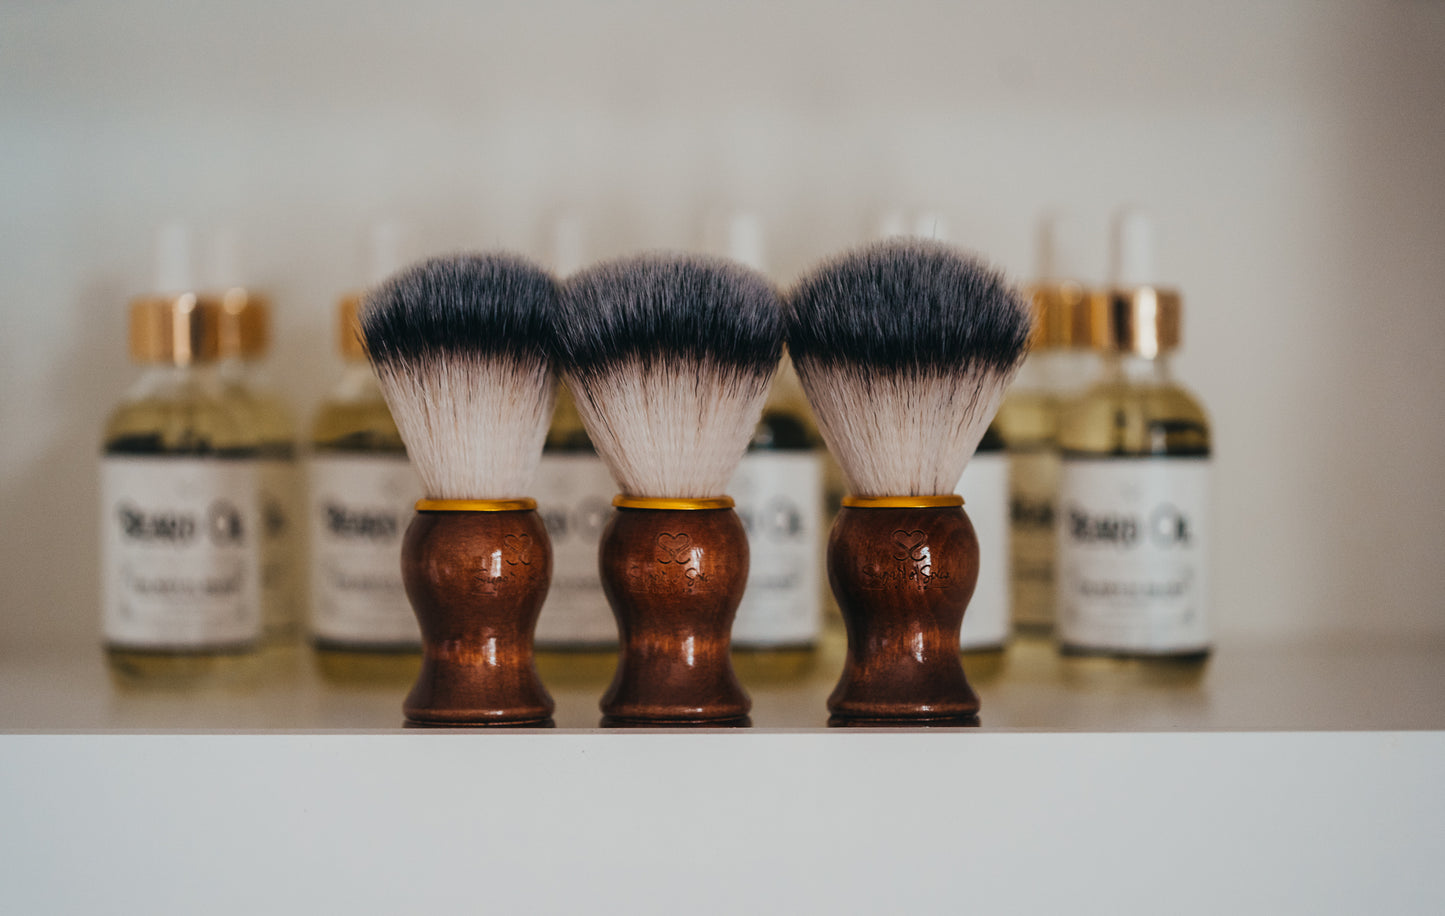 Shave or Powder Brush (for men and women)